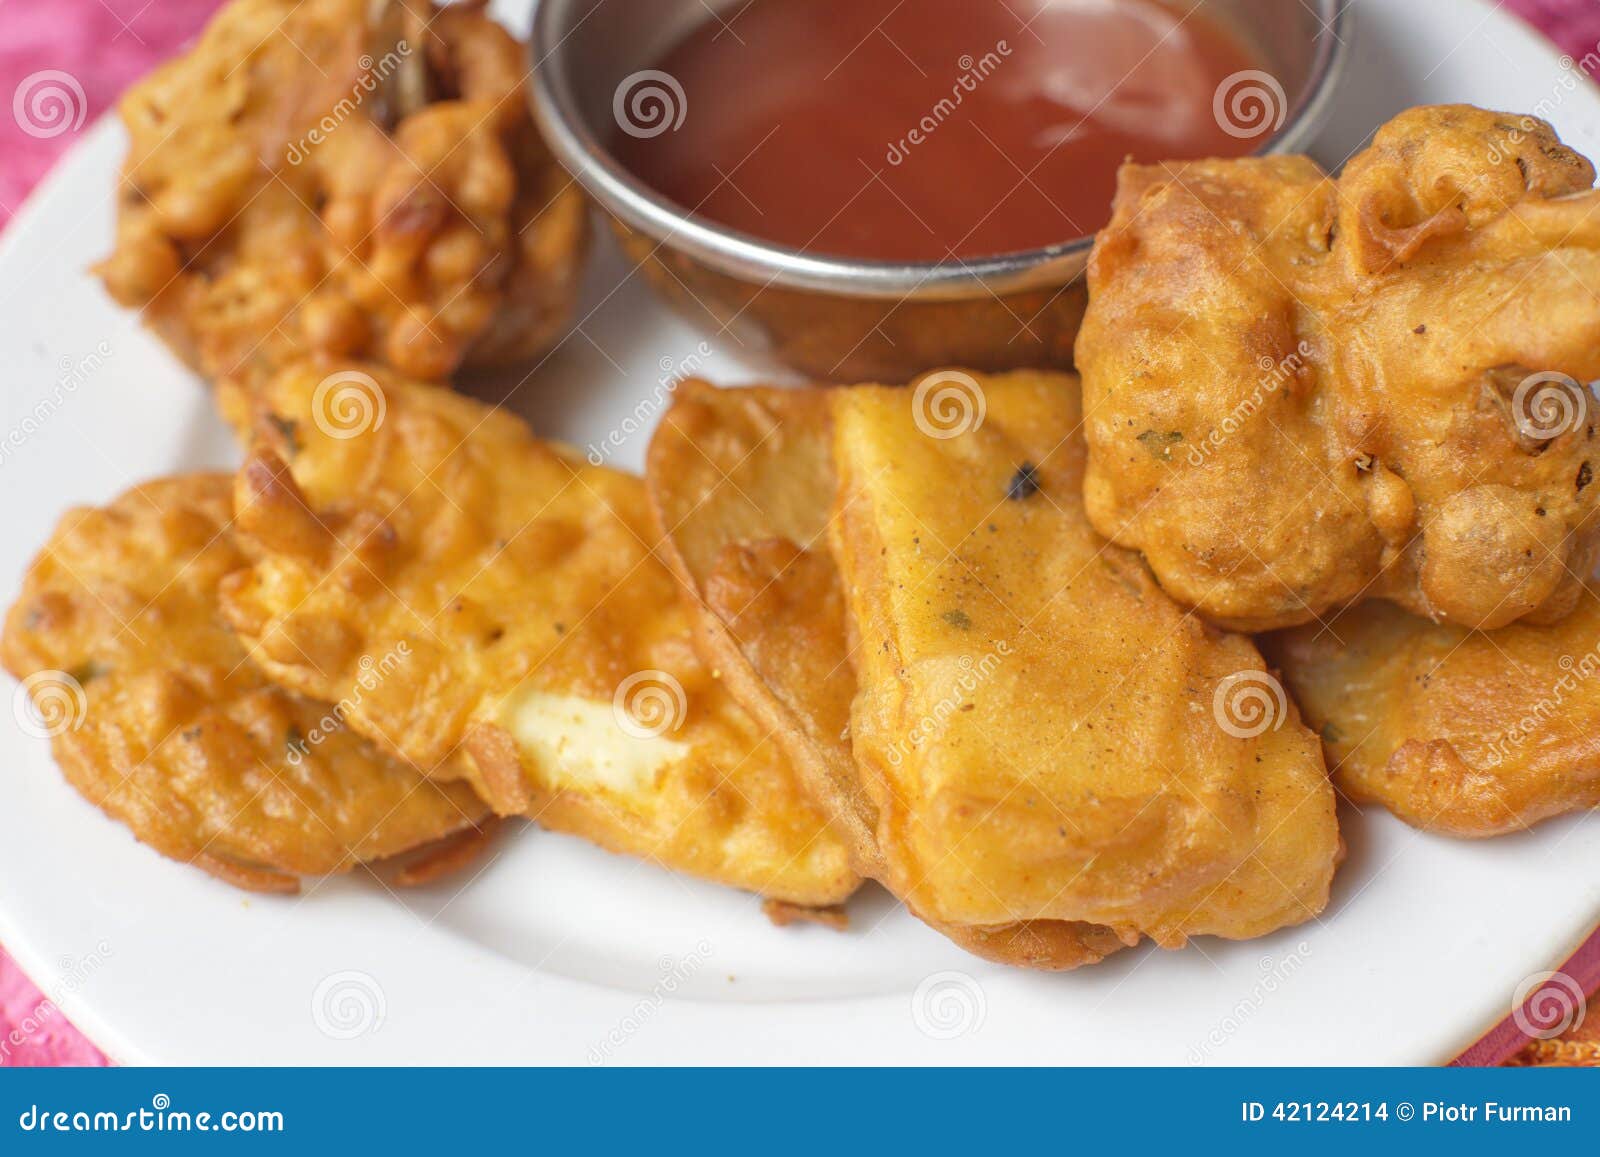 Traditional Indian Food Fried Fish Stock Photo - Image of traditional ...